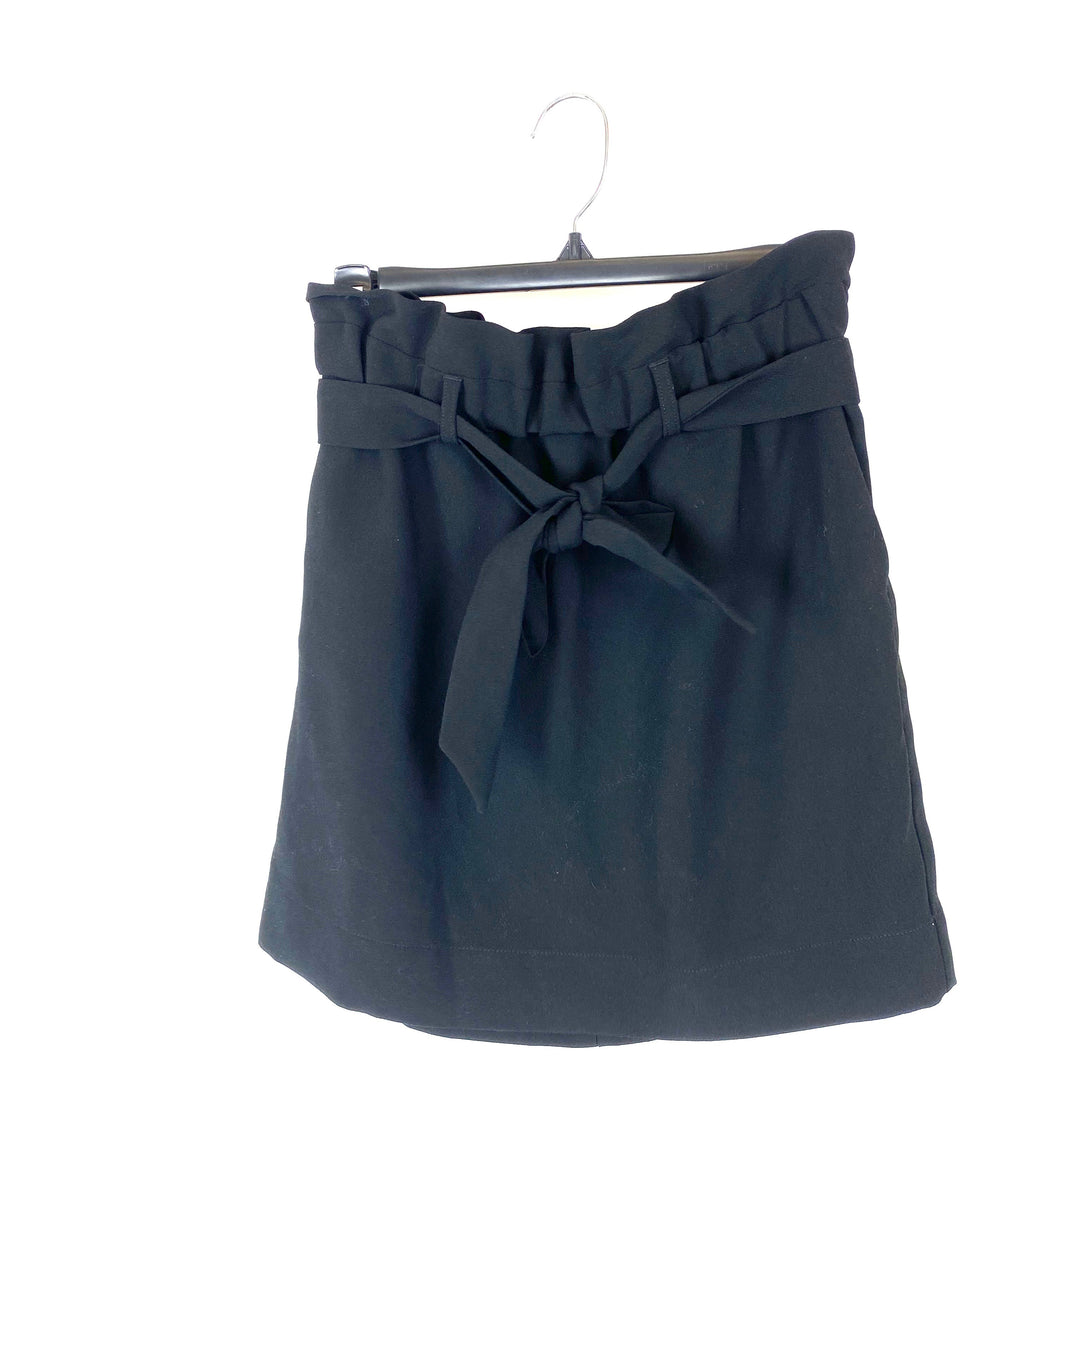 Black Skirt With Bow Belt - Extra Small